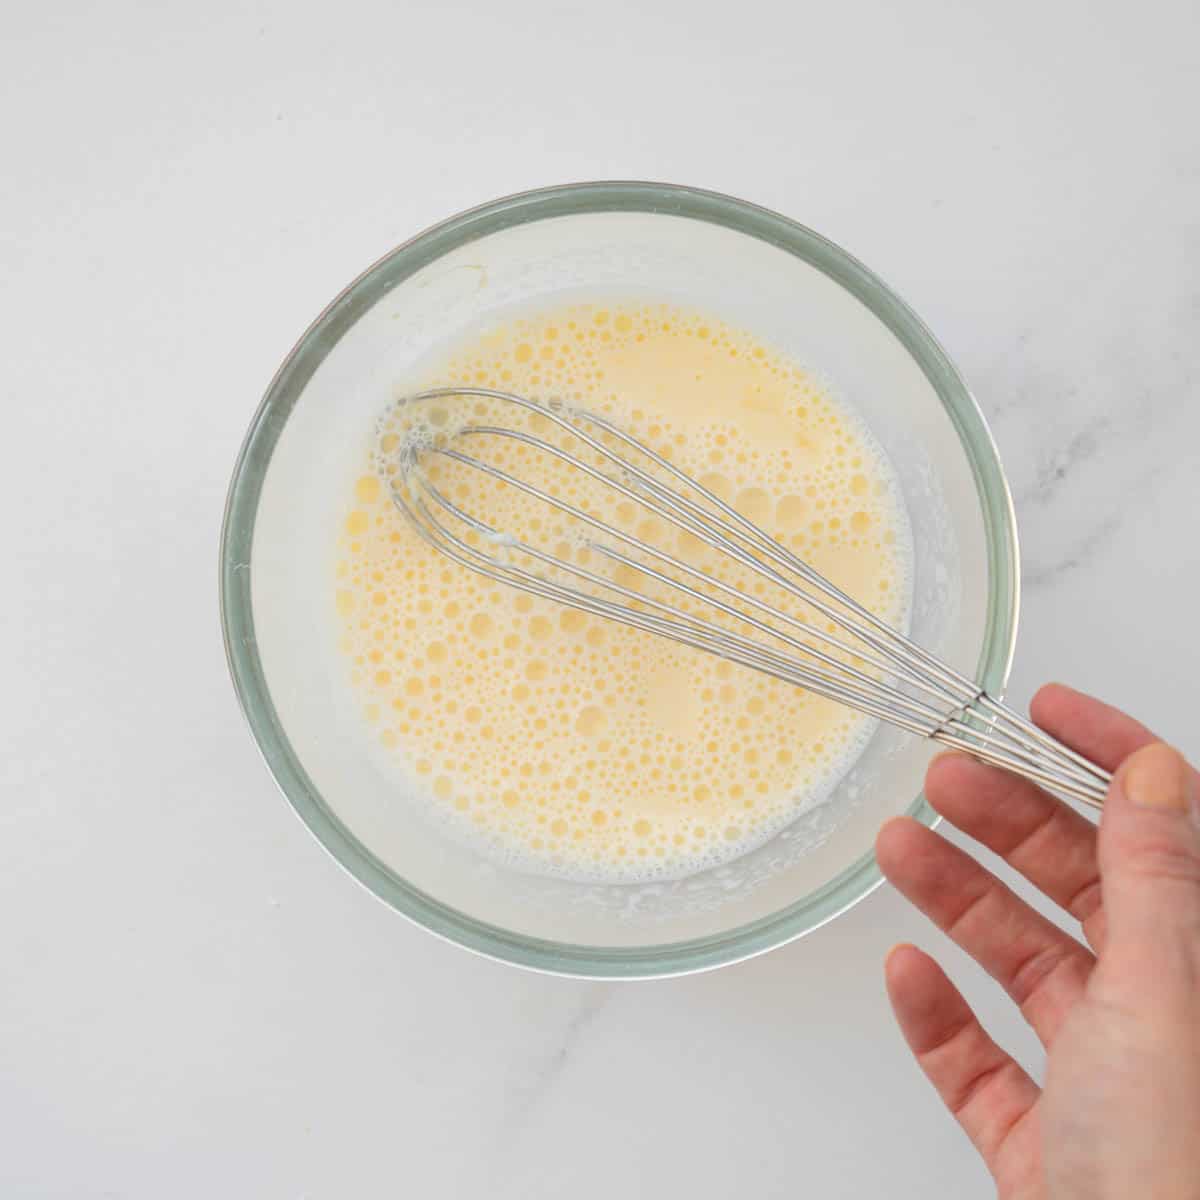 Uncooked egg and milk mixture in a glass mixing bowl with a whisk.